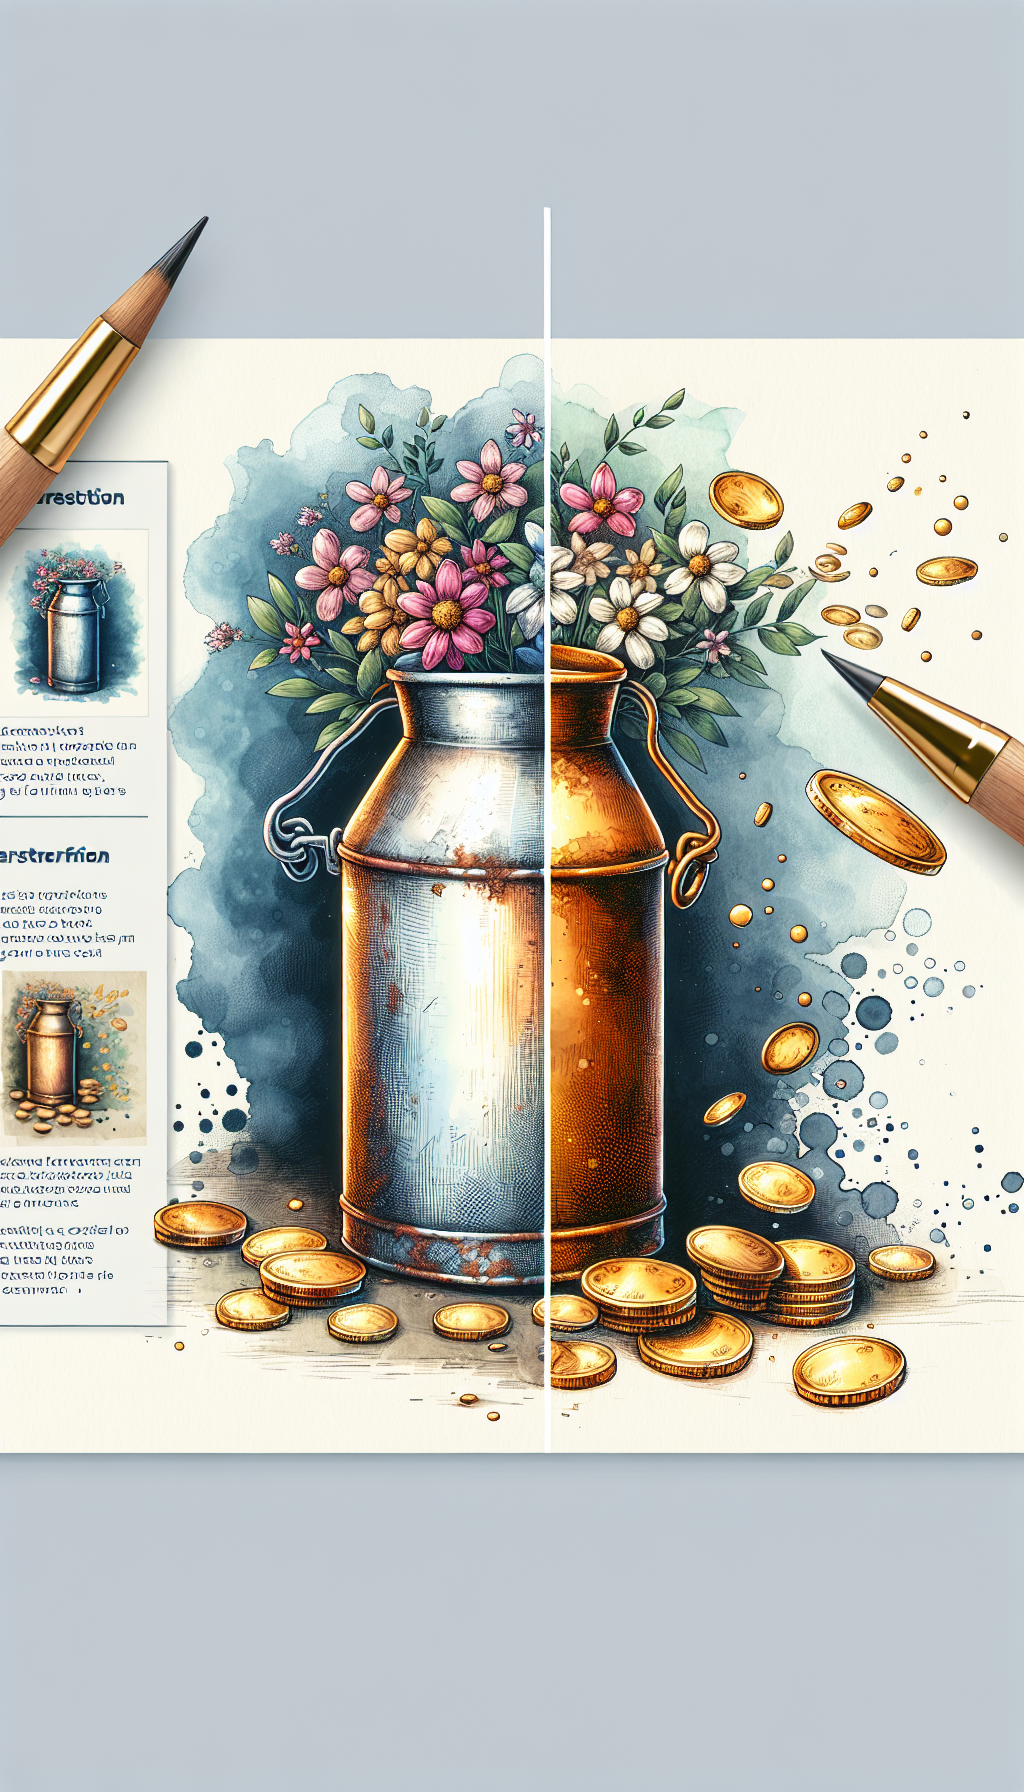 An illustration depicts a gleaming antique milk can adorned with vibrant flowers, now serving as a unique vase. Half restored, the can transitions from rust to radiance, with gold coins spilling from its open top, symbolizing its increased value. The can is set against a backdrop of blurbs detailing restoration tips, with different artistic techniques like watercolor and linework showcasing its transformation.